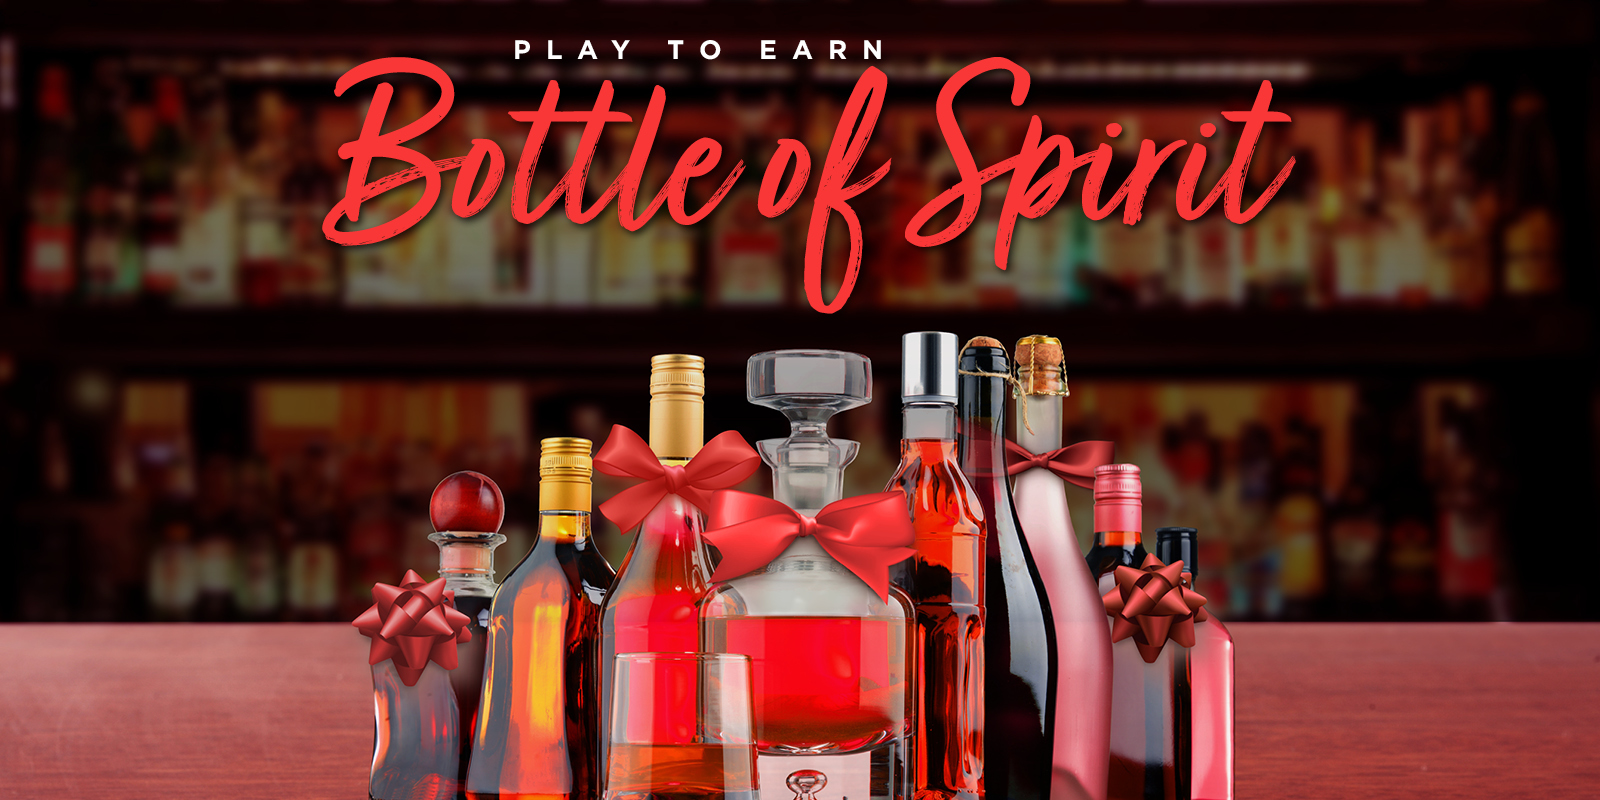 Bottles of alcohol lined up on a bar with red ribbons for a casino event where people can play to earn a bottle.